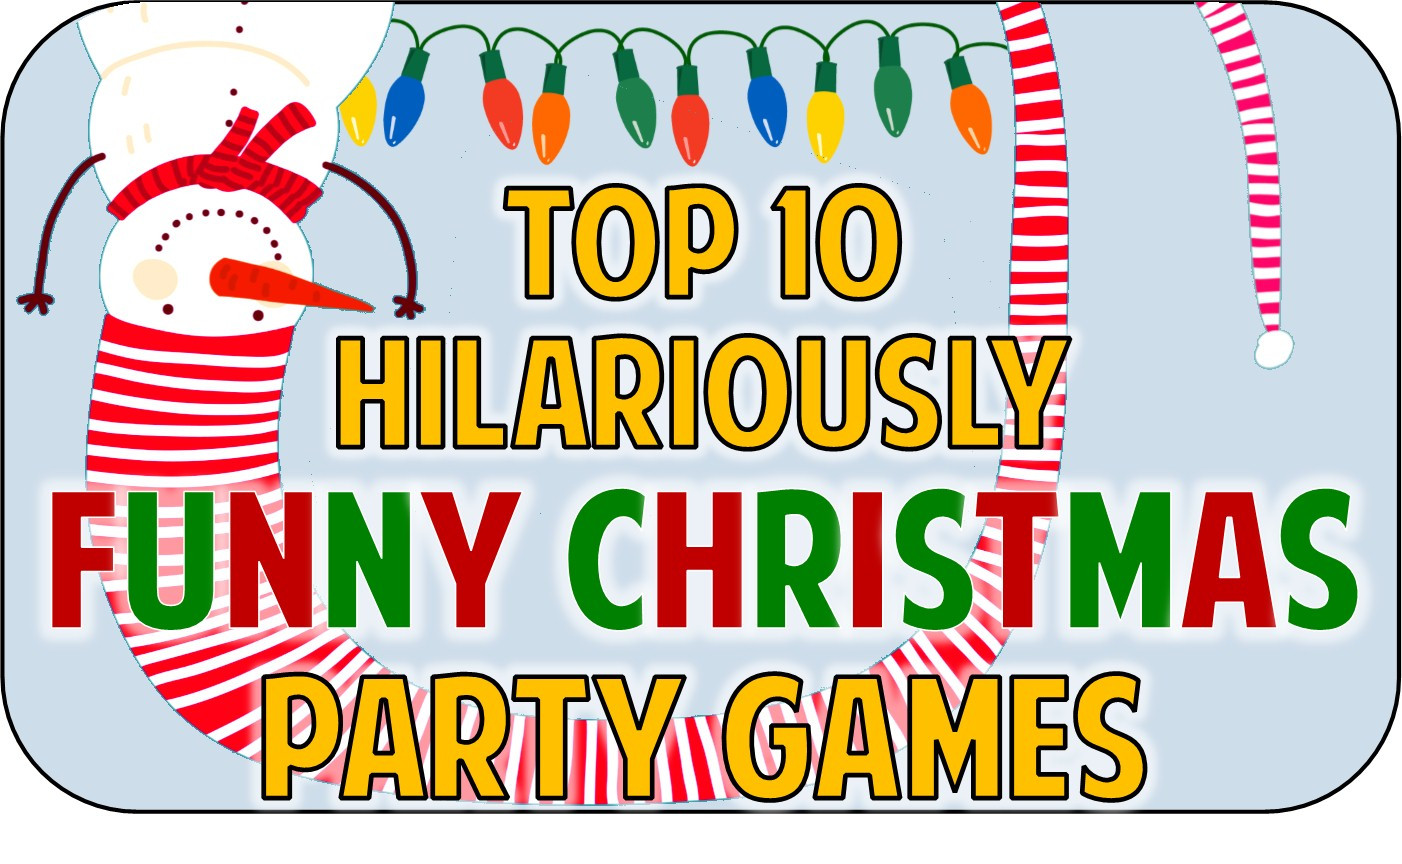 Funny Christmas Theme Party Ideas
 Christmas Party fice Games